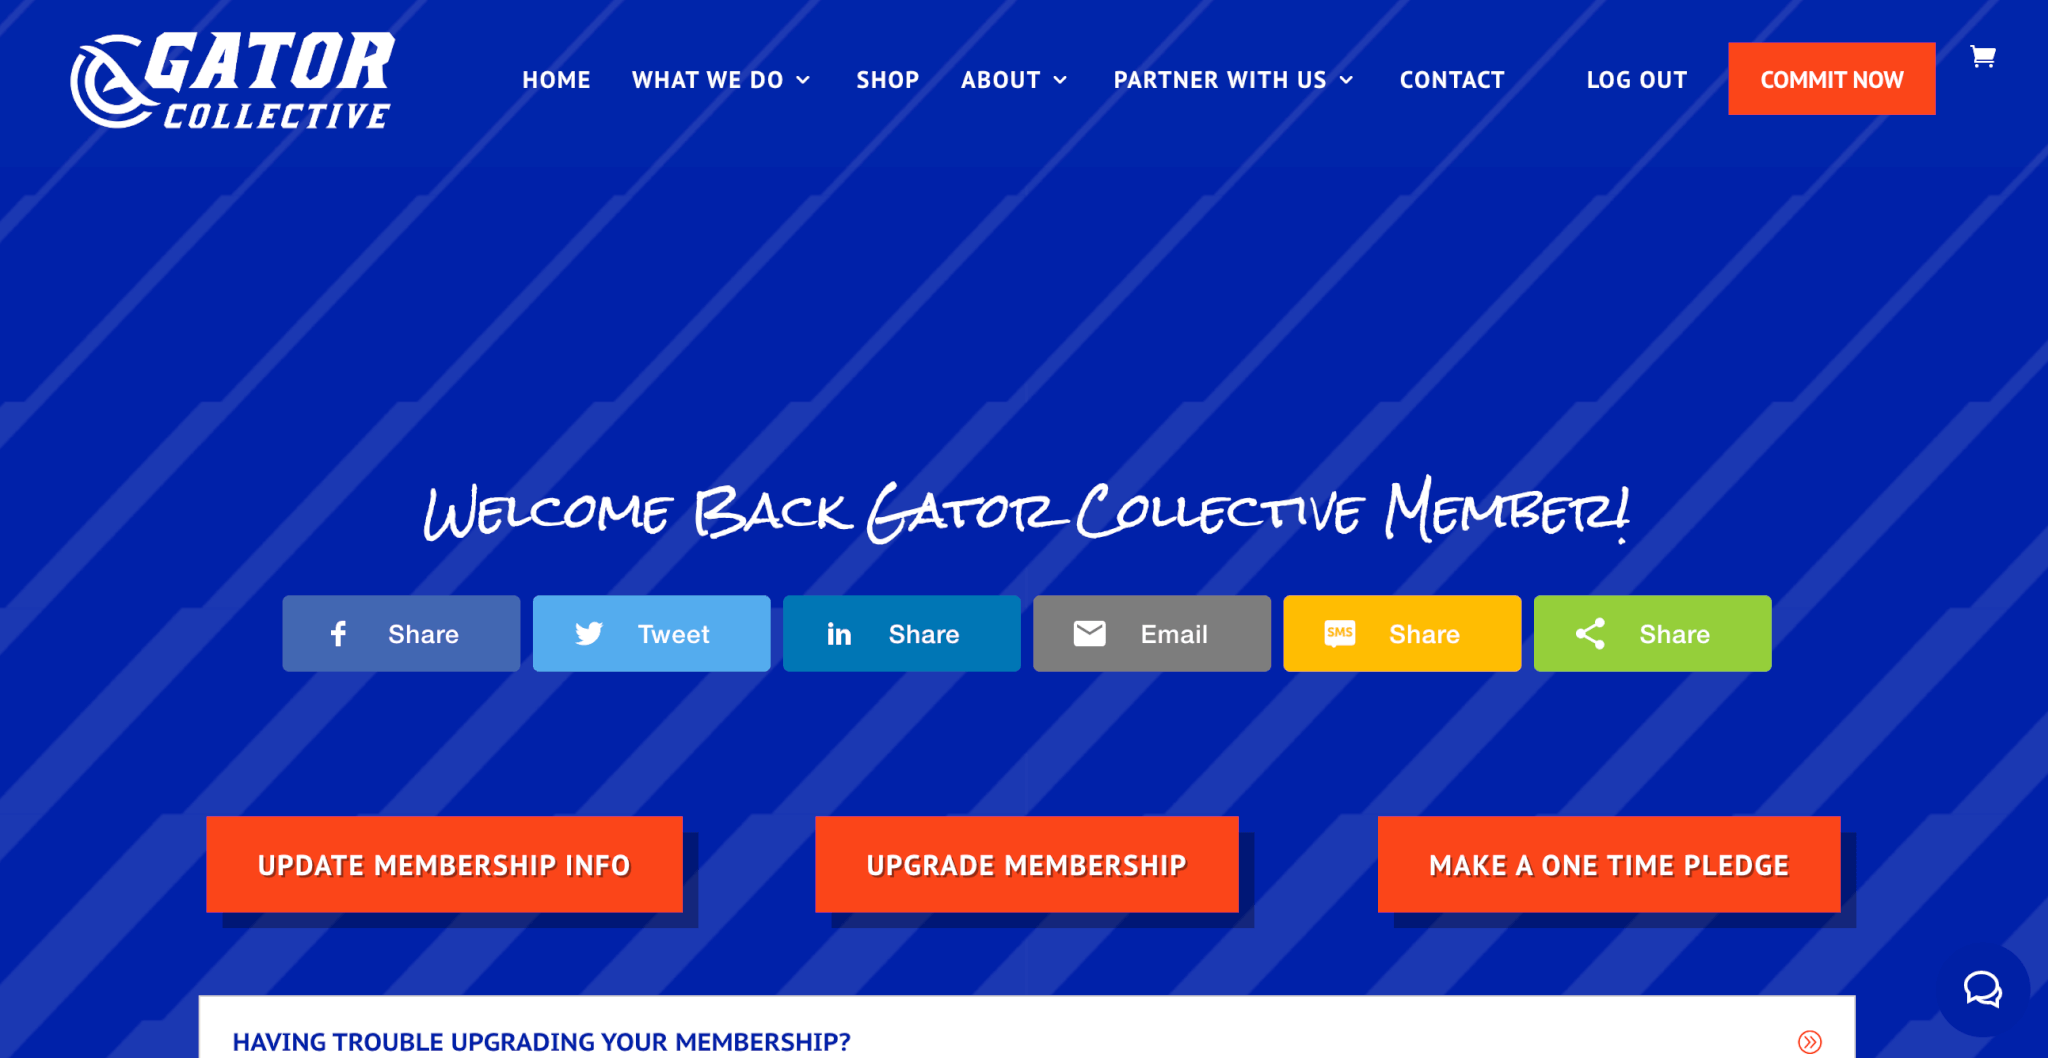 Gator collective new website membership dashboard created and designed by stingray branding